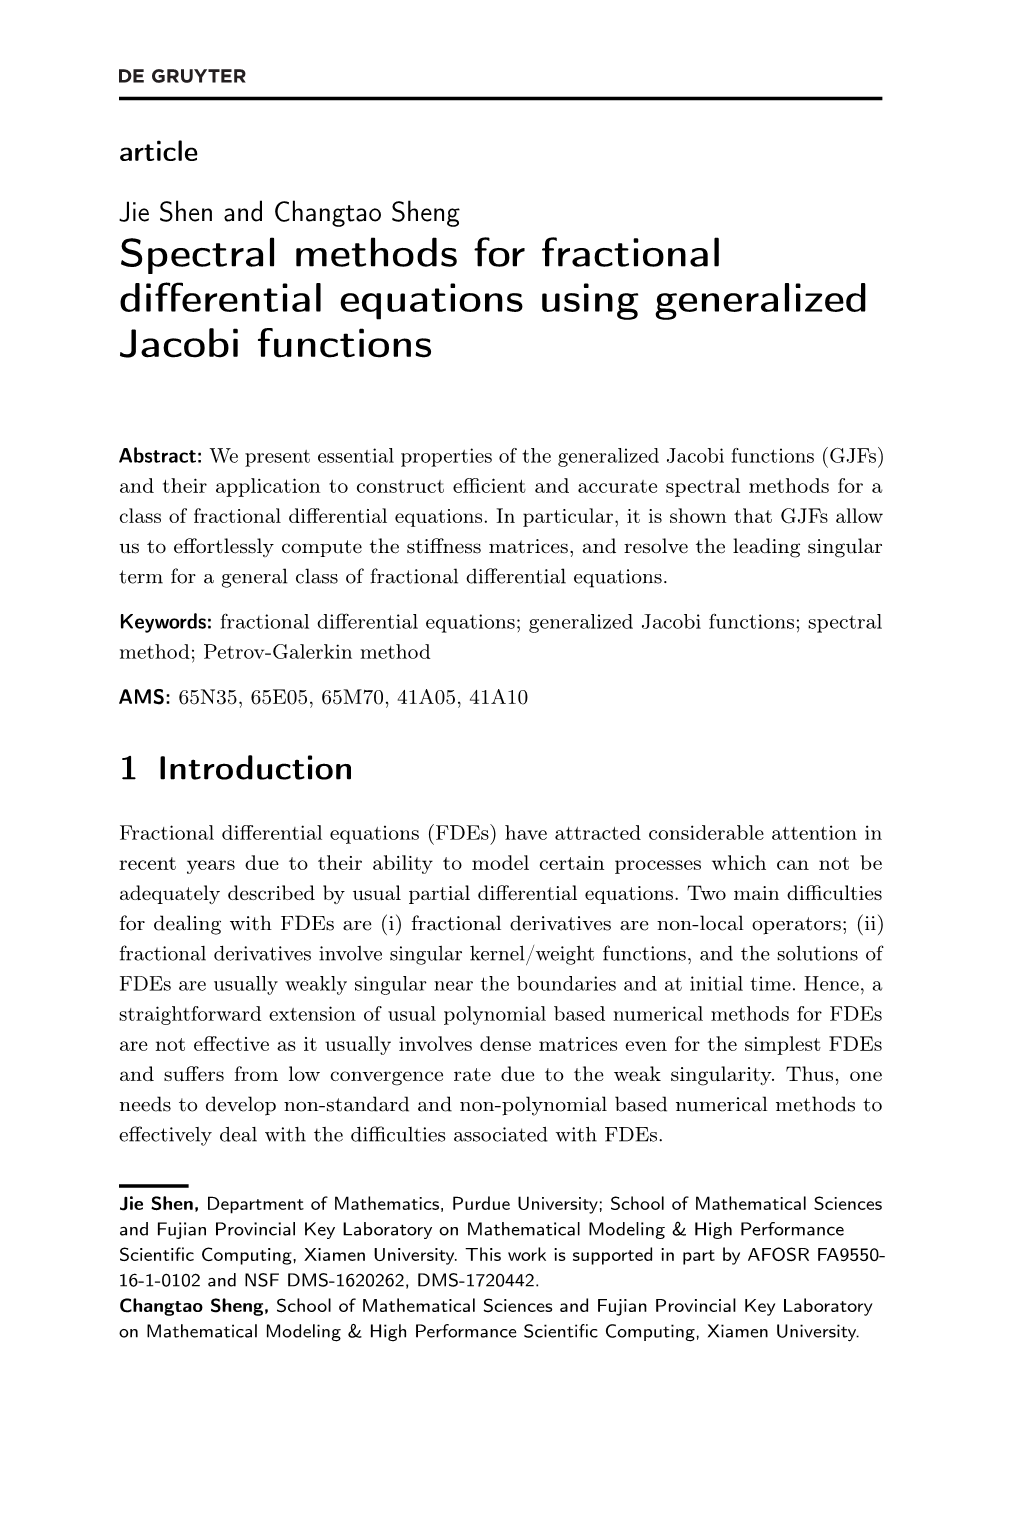 Spectral Methods for Fractional Differential Equations Using Generalized Jacobi Functions